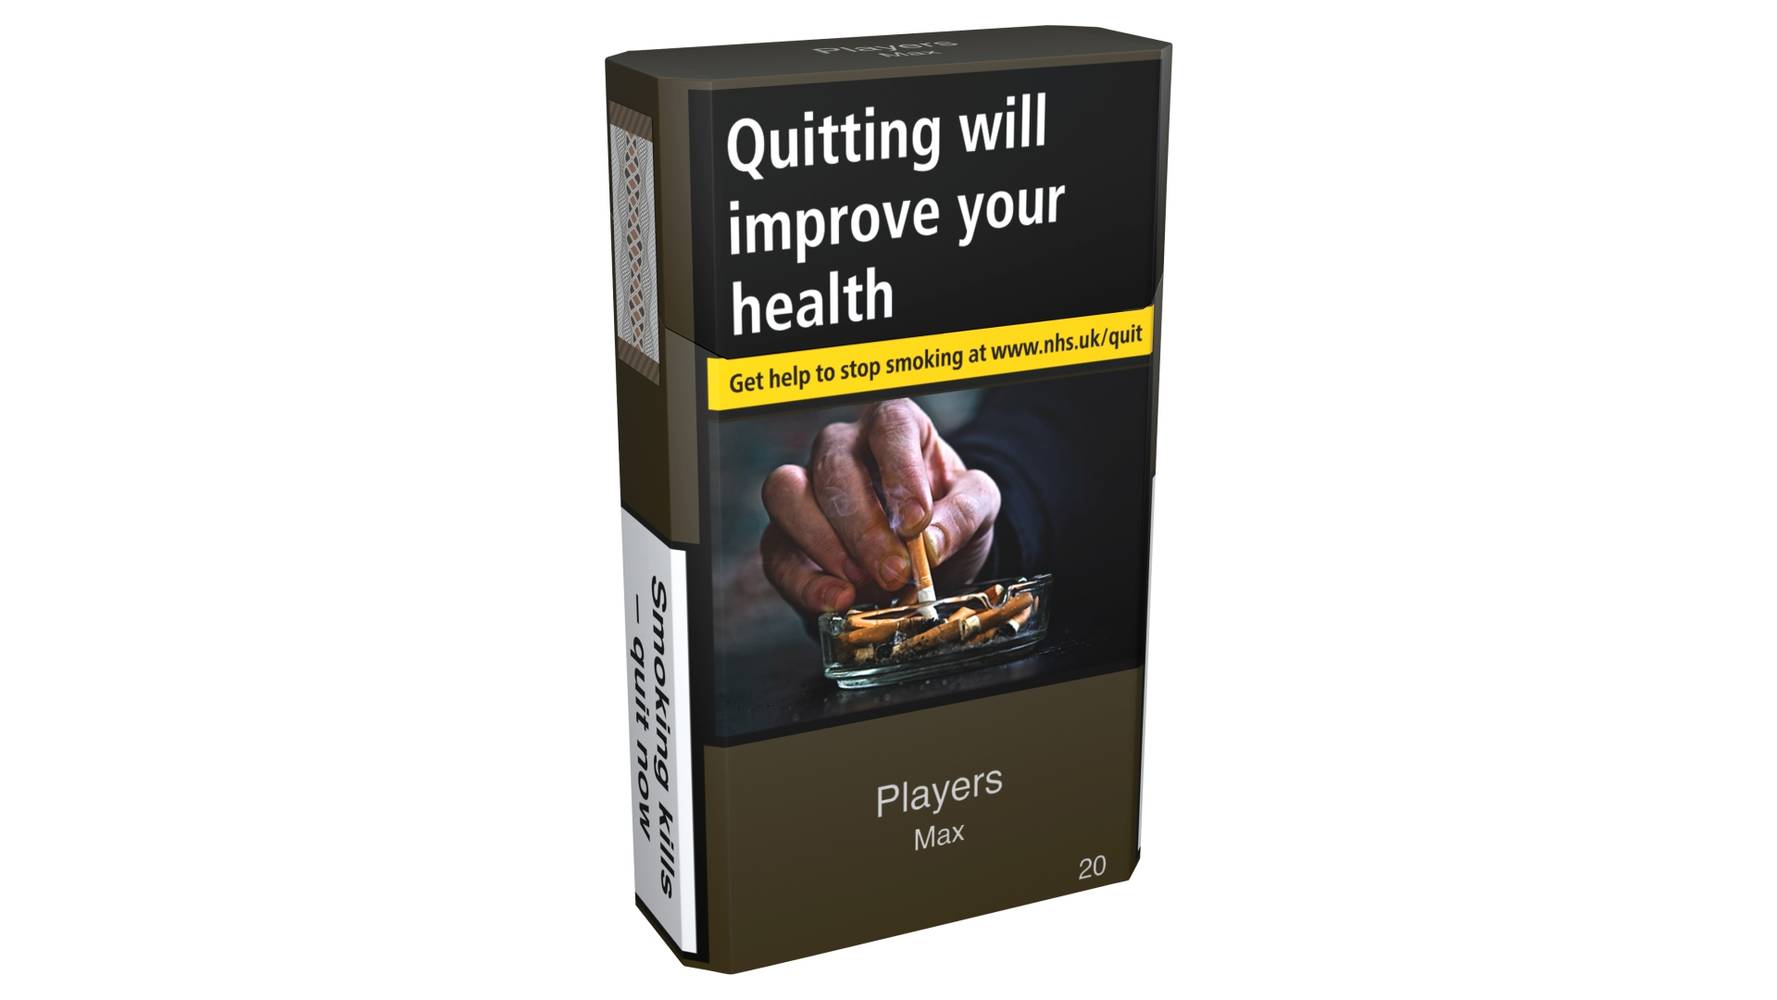 Players Quitting Will Improve Your Health Max Cigarettes